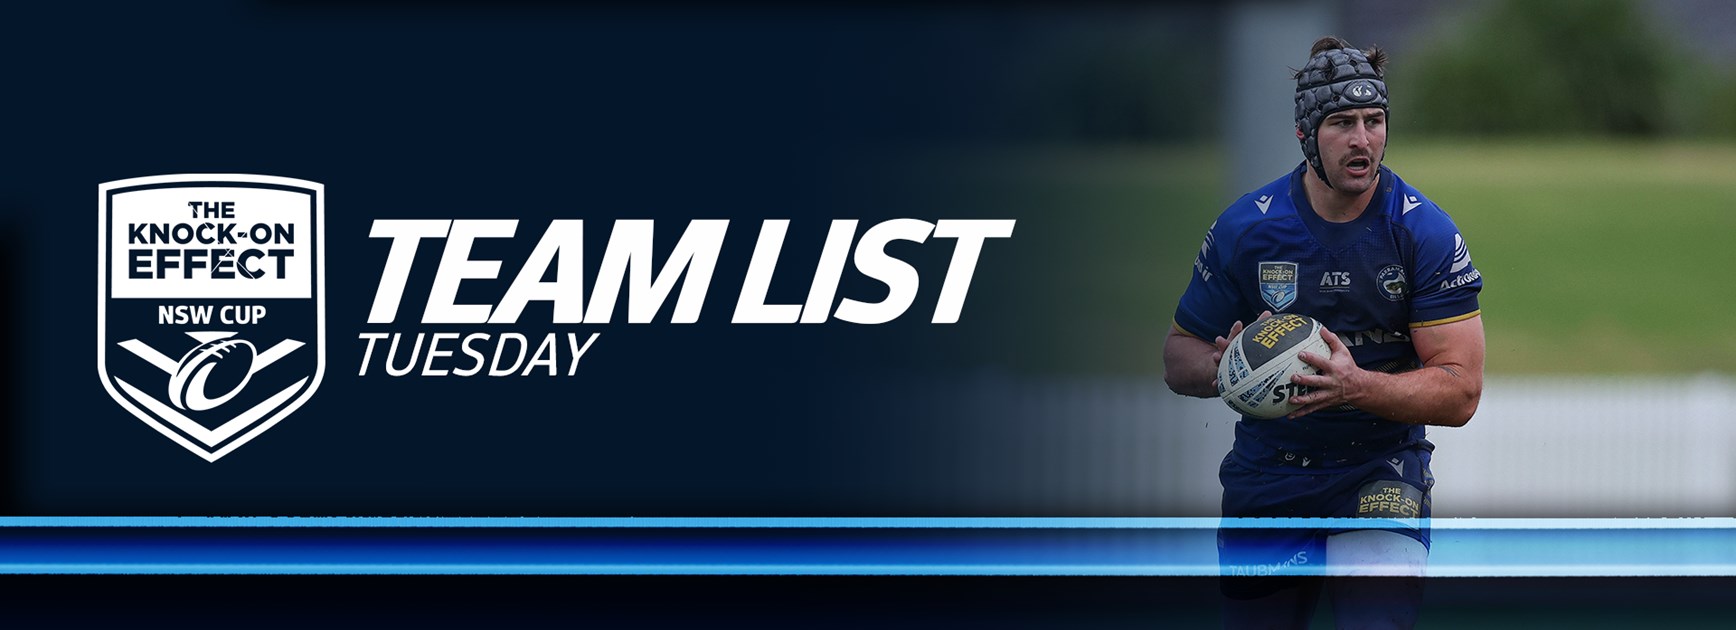 Team List Tuesday | The Knock-On Effect NSW Cup - Round 18